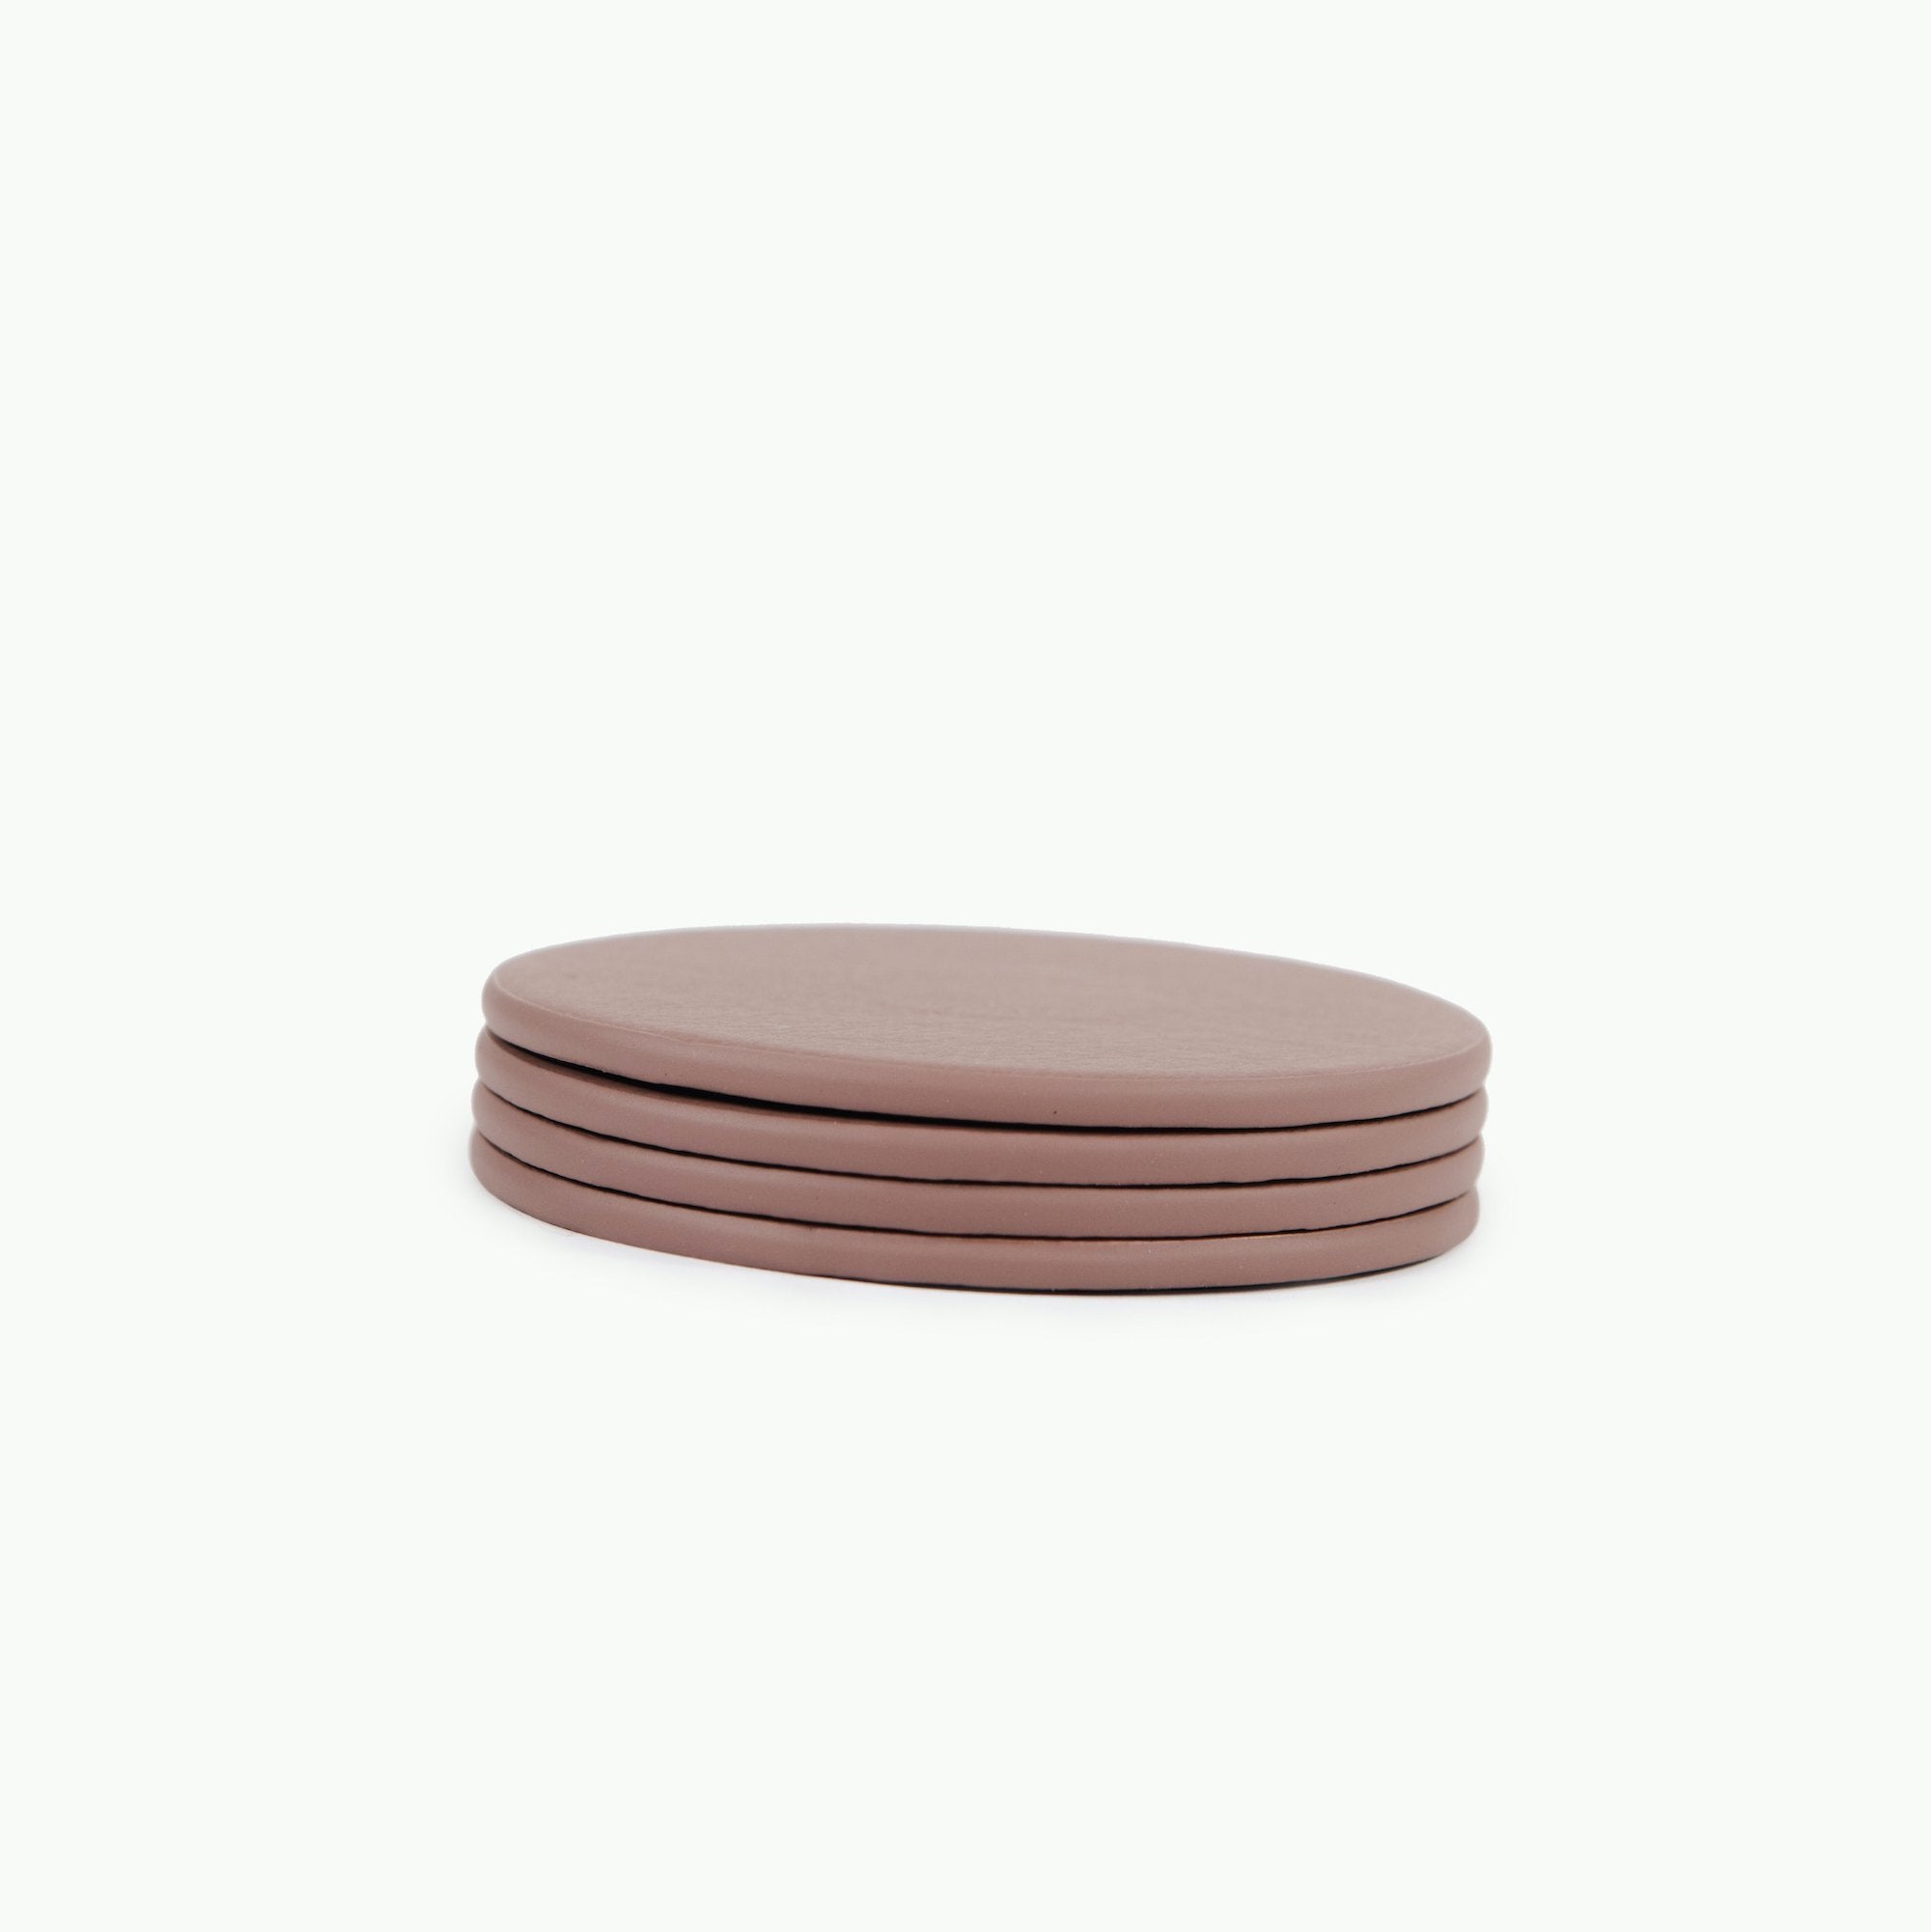 Currant (on sale)@Currant Coasters